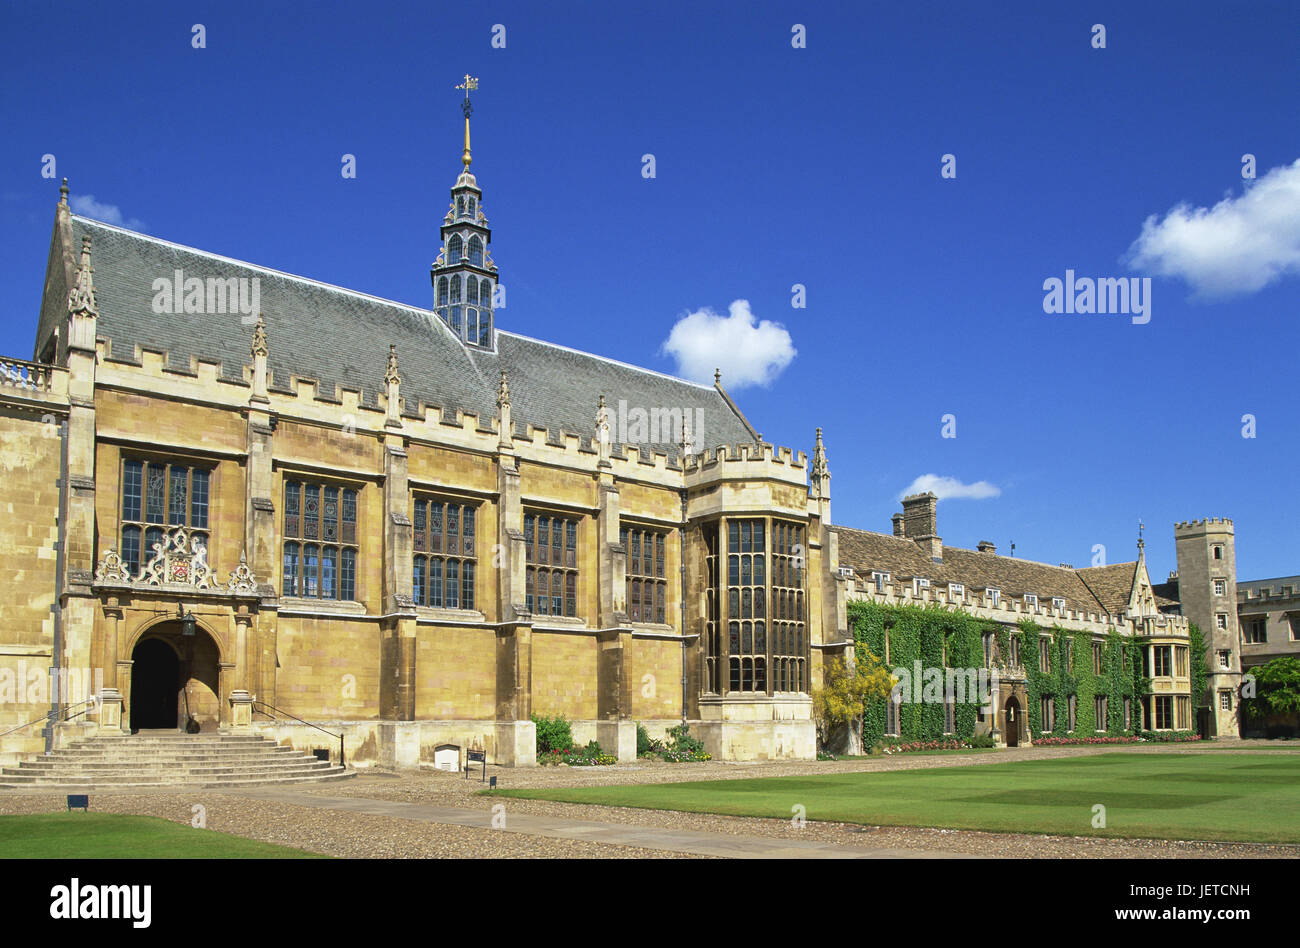 Great Britain, England, Cambridgeshire, Cambridge, Trinity college, Great court, The sound, Europe, town, destination, place of interest, building, structure, architecture, architecture, university, university building, facade, inner courtyard, main square, turf, deserted, stairs, input, hall, Stock Photo